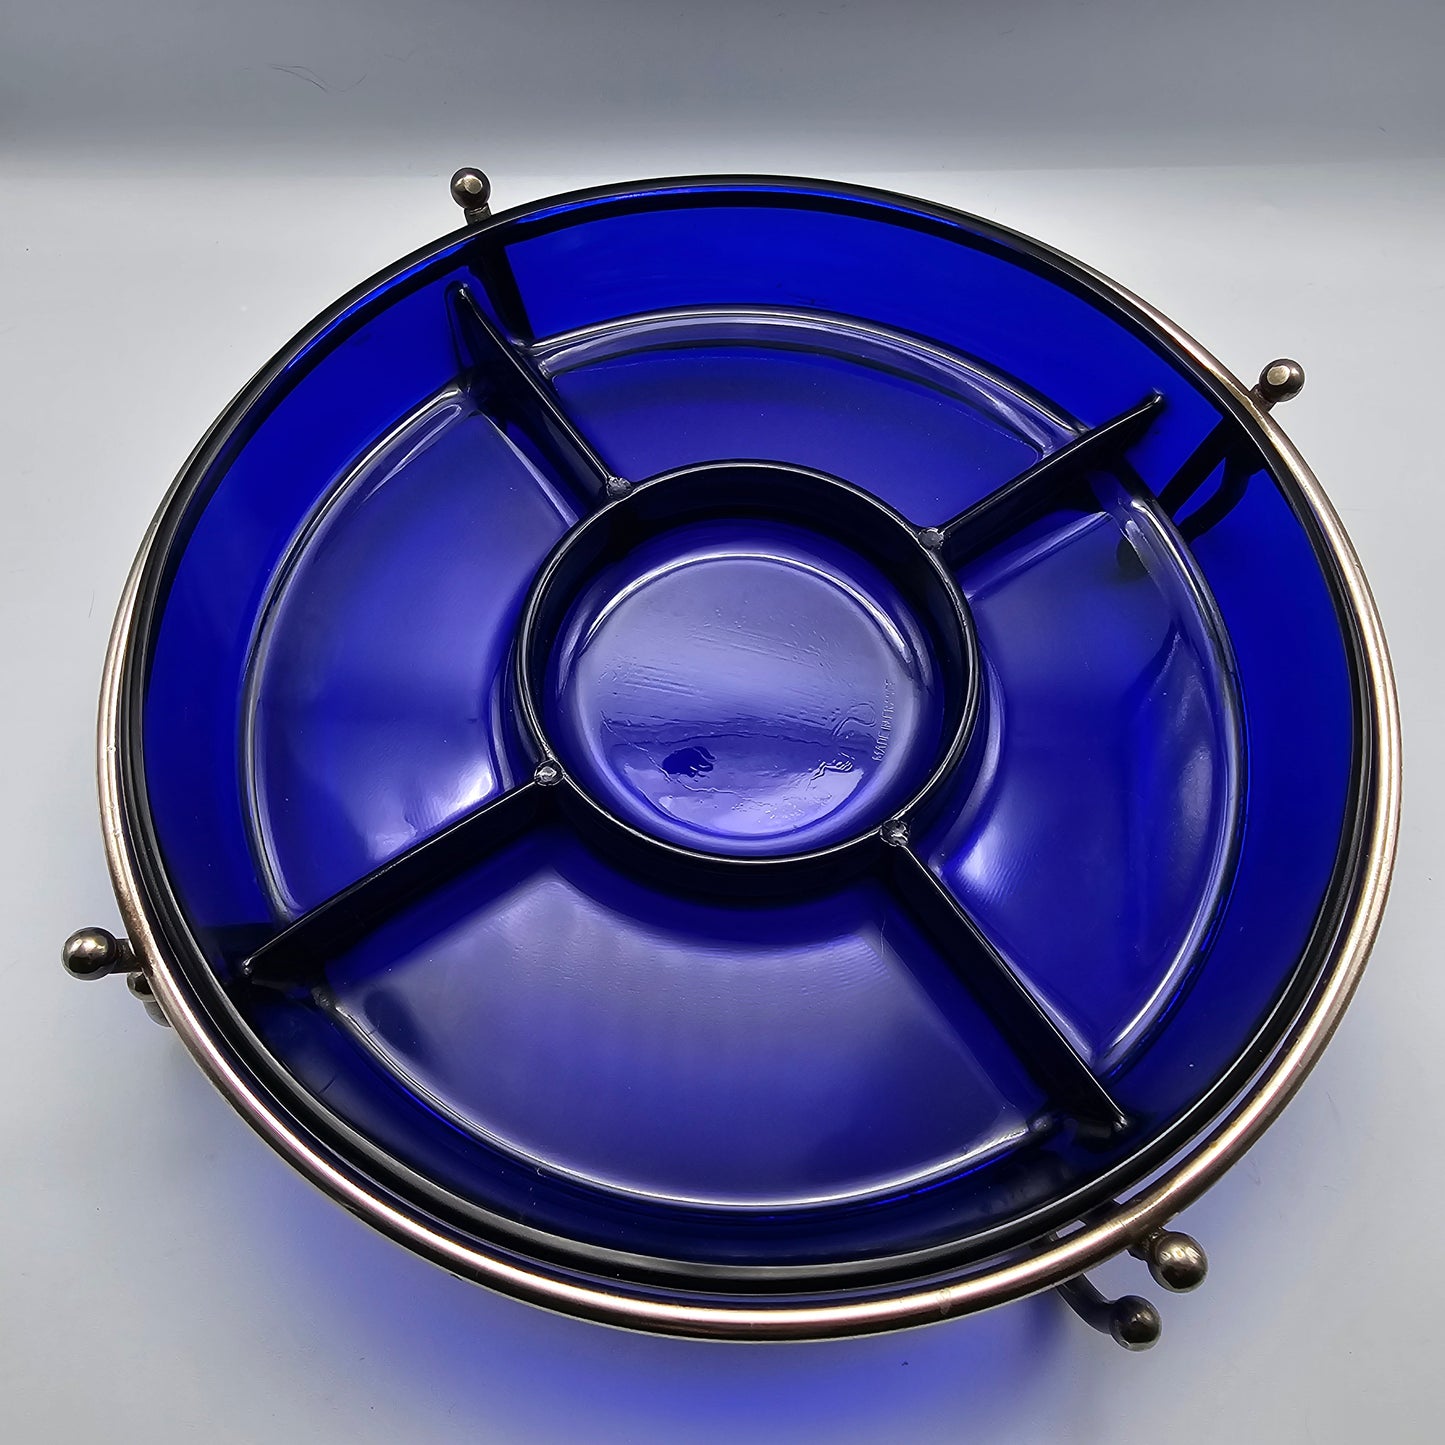 Vintage French Cobalt Blue Glass Divided Relish Dish with Silver Plated Metal Stand